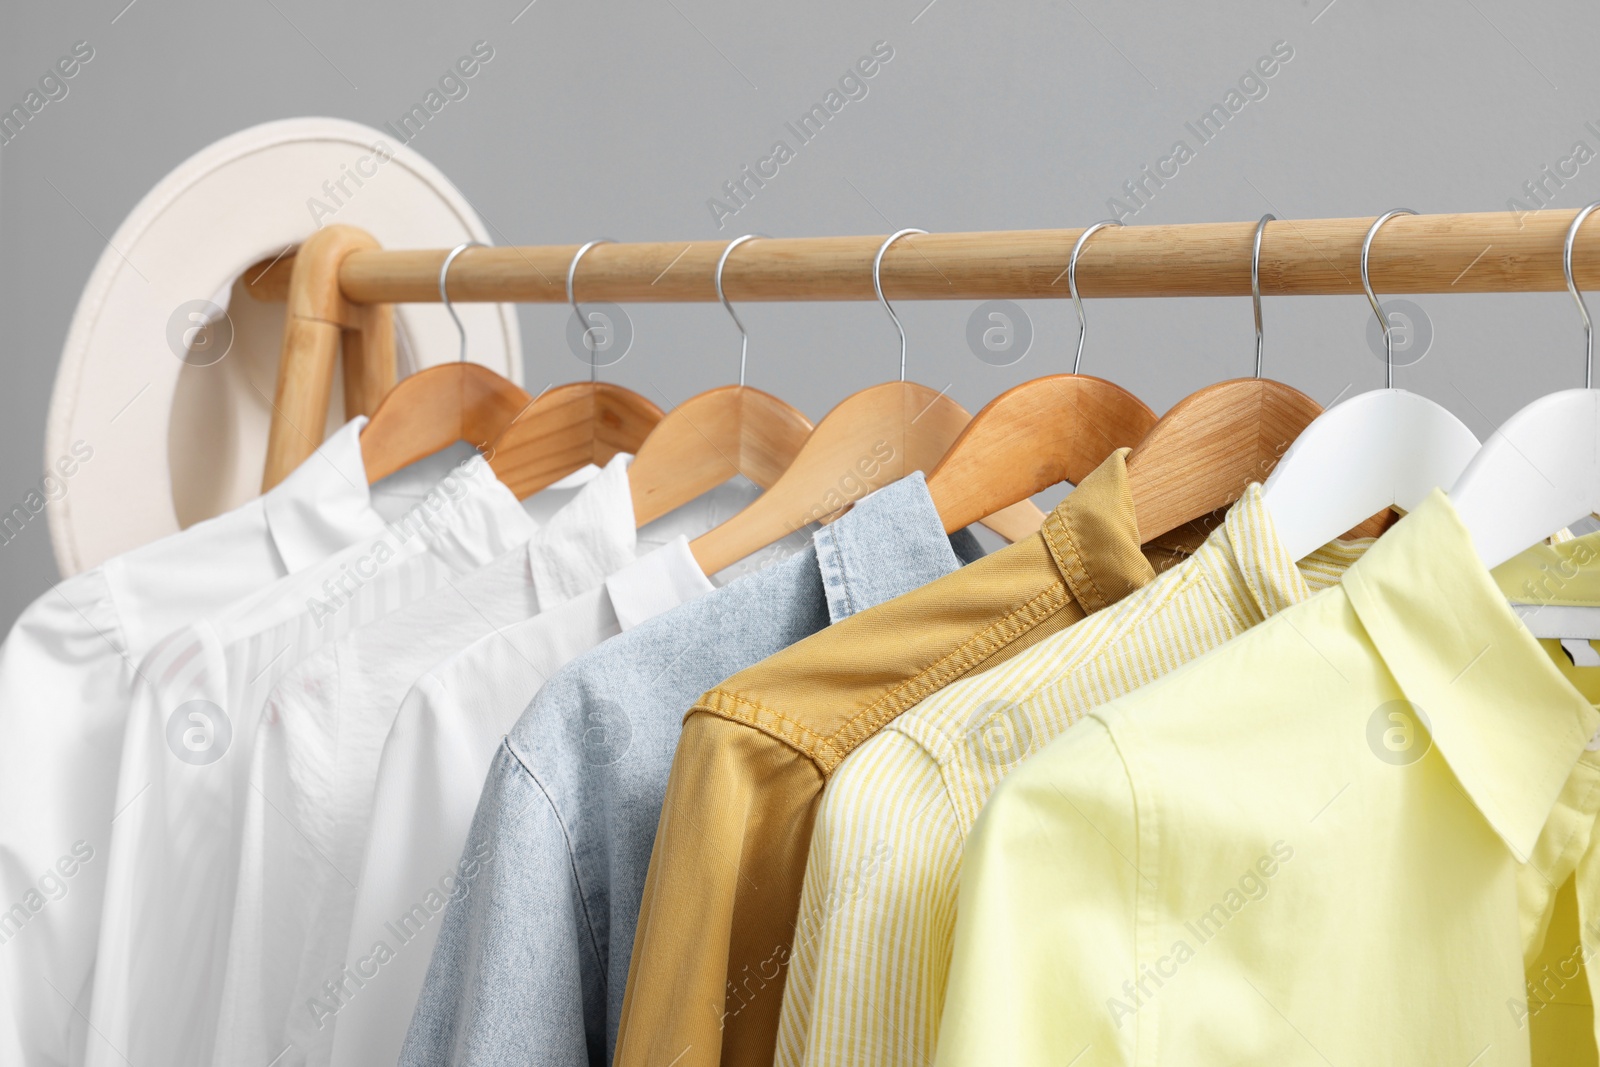 Photo of Rack with different stylish shirts against grey background, closeup. Organizing clothes